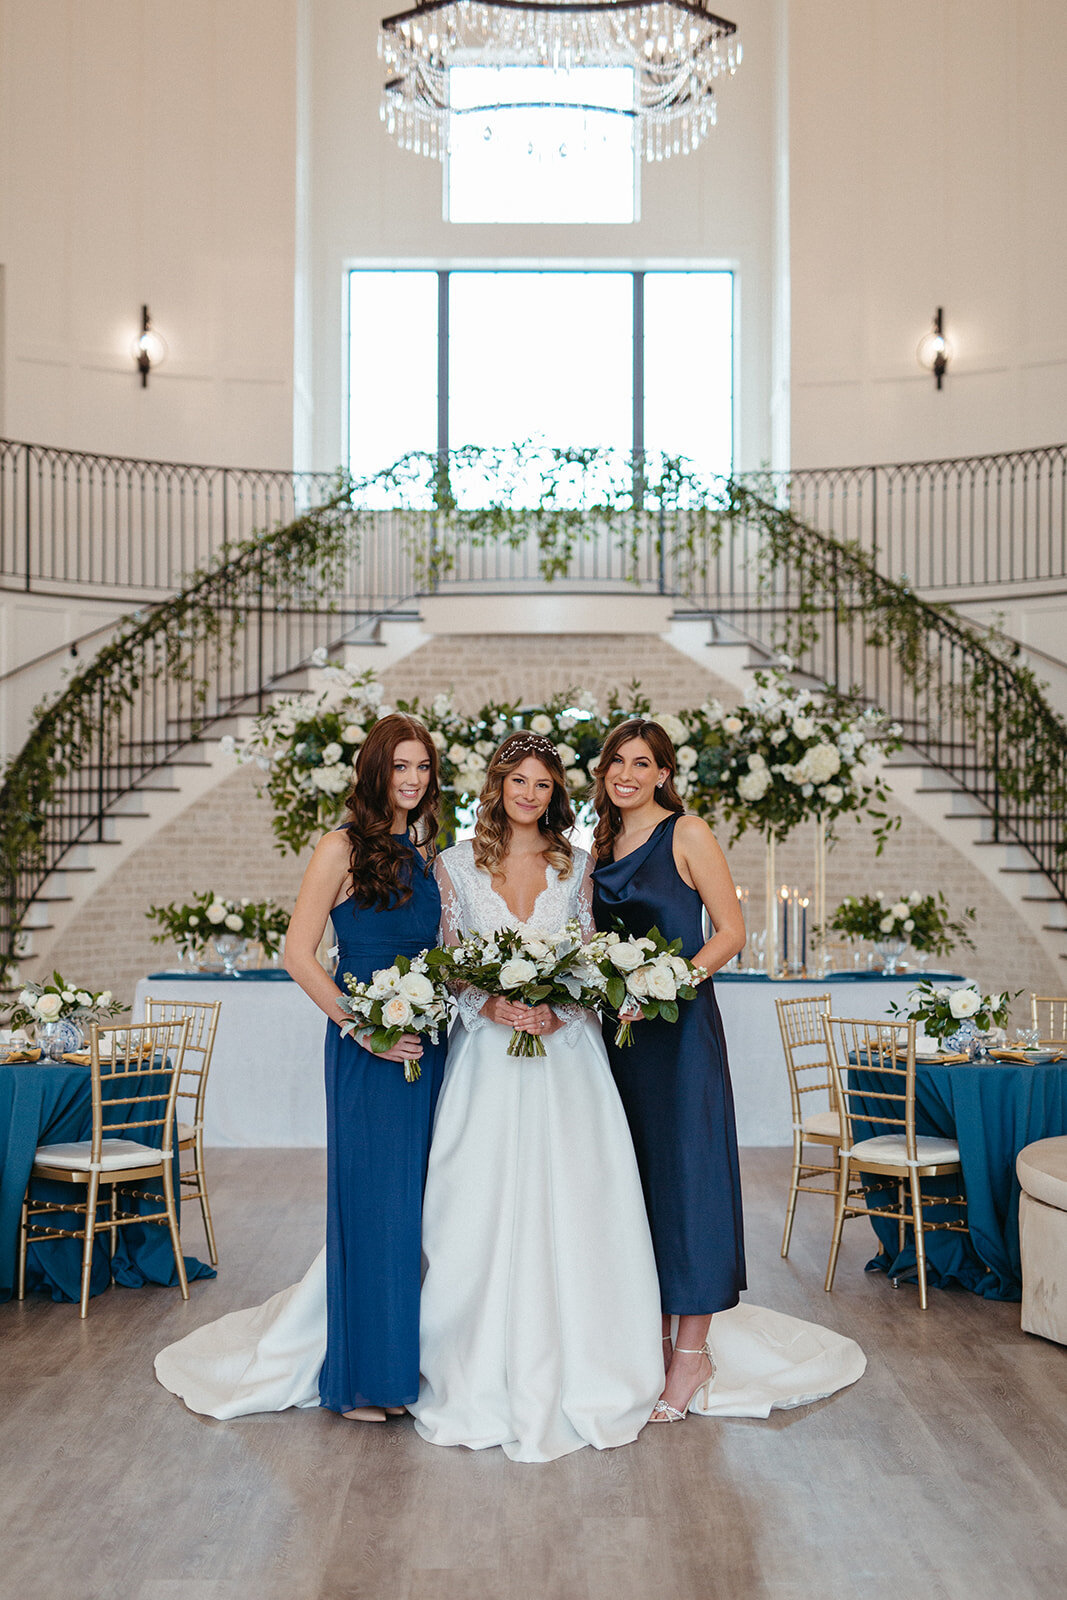 A bride in a white wedding gown and two bridesmaids in blue gowns holding white bouquets in a banquet room.